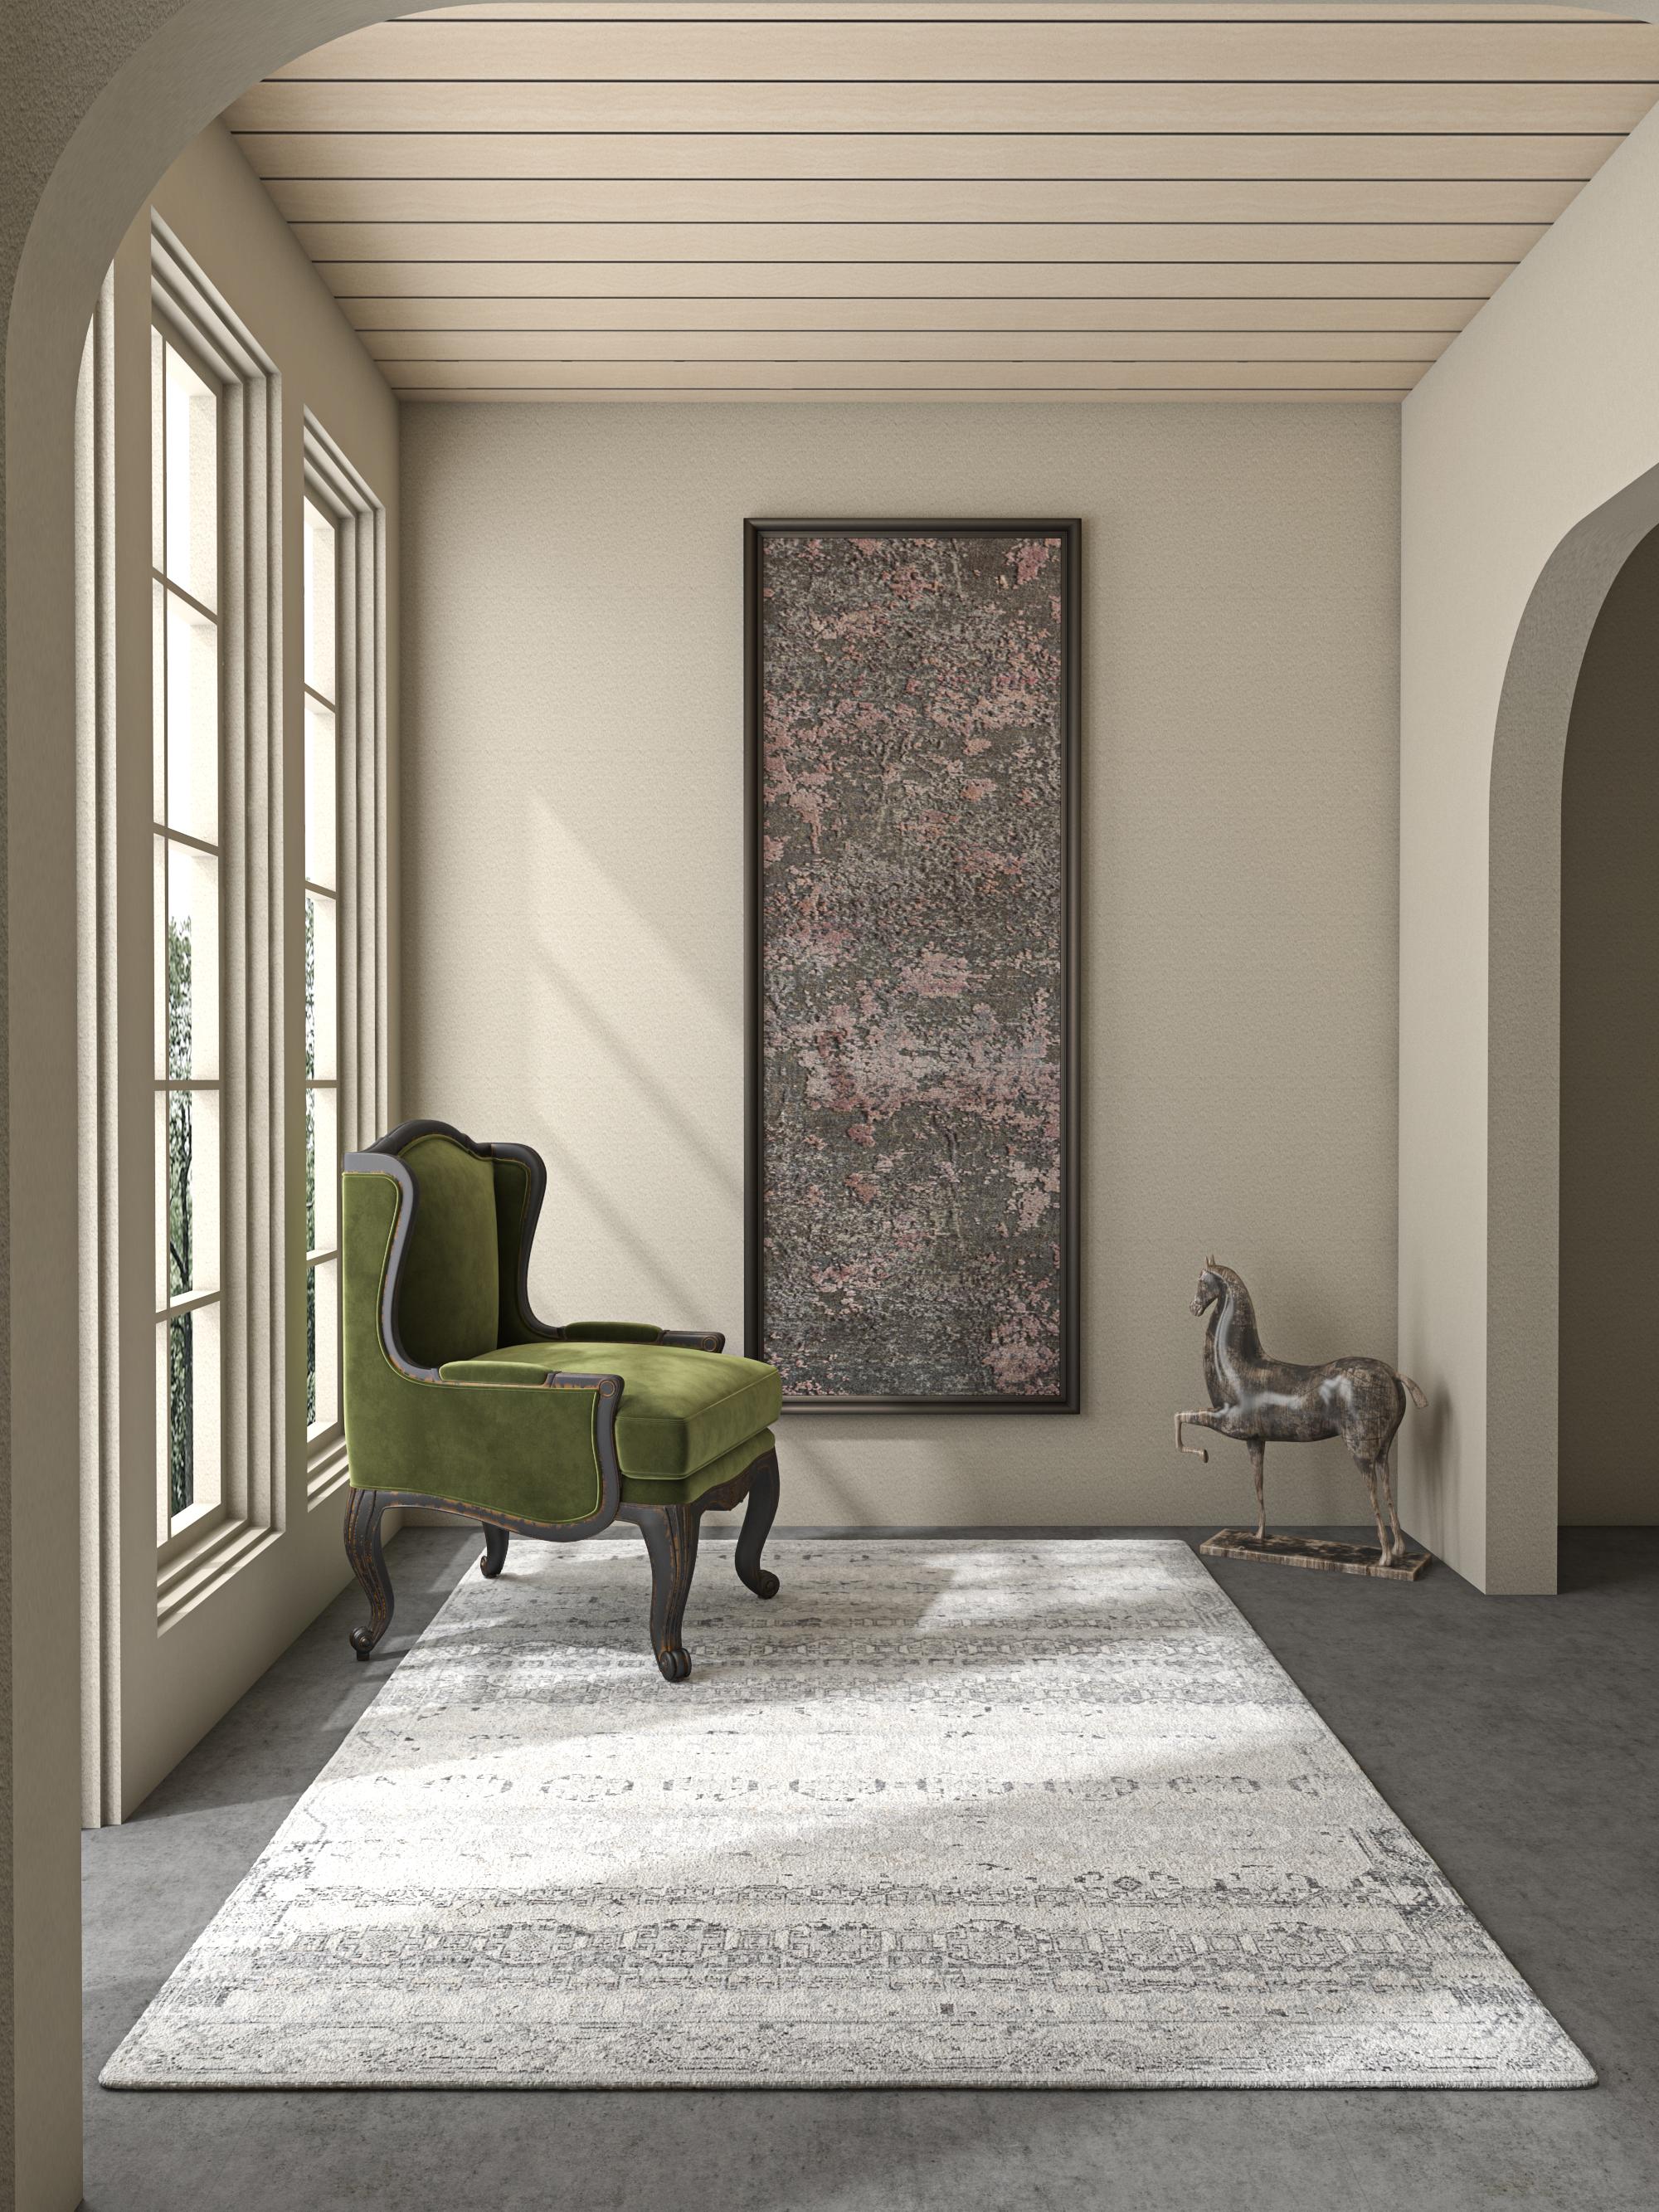 Elevate your space with this handknotted rug , a masterpiece in medium taupe wool with a crisp white border. Immerse yourself in the artistry, inspired by primitive cultures worldwide, meticulously hand-knotted to perfection. This heirloom piece